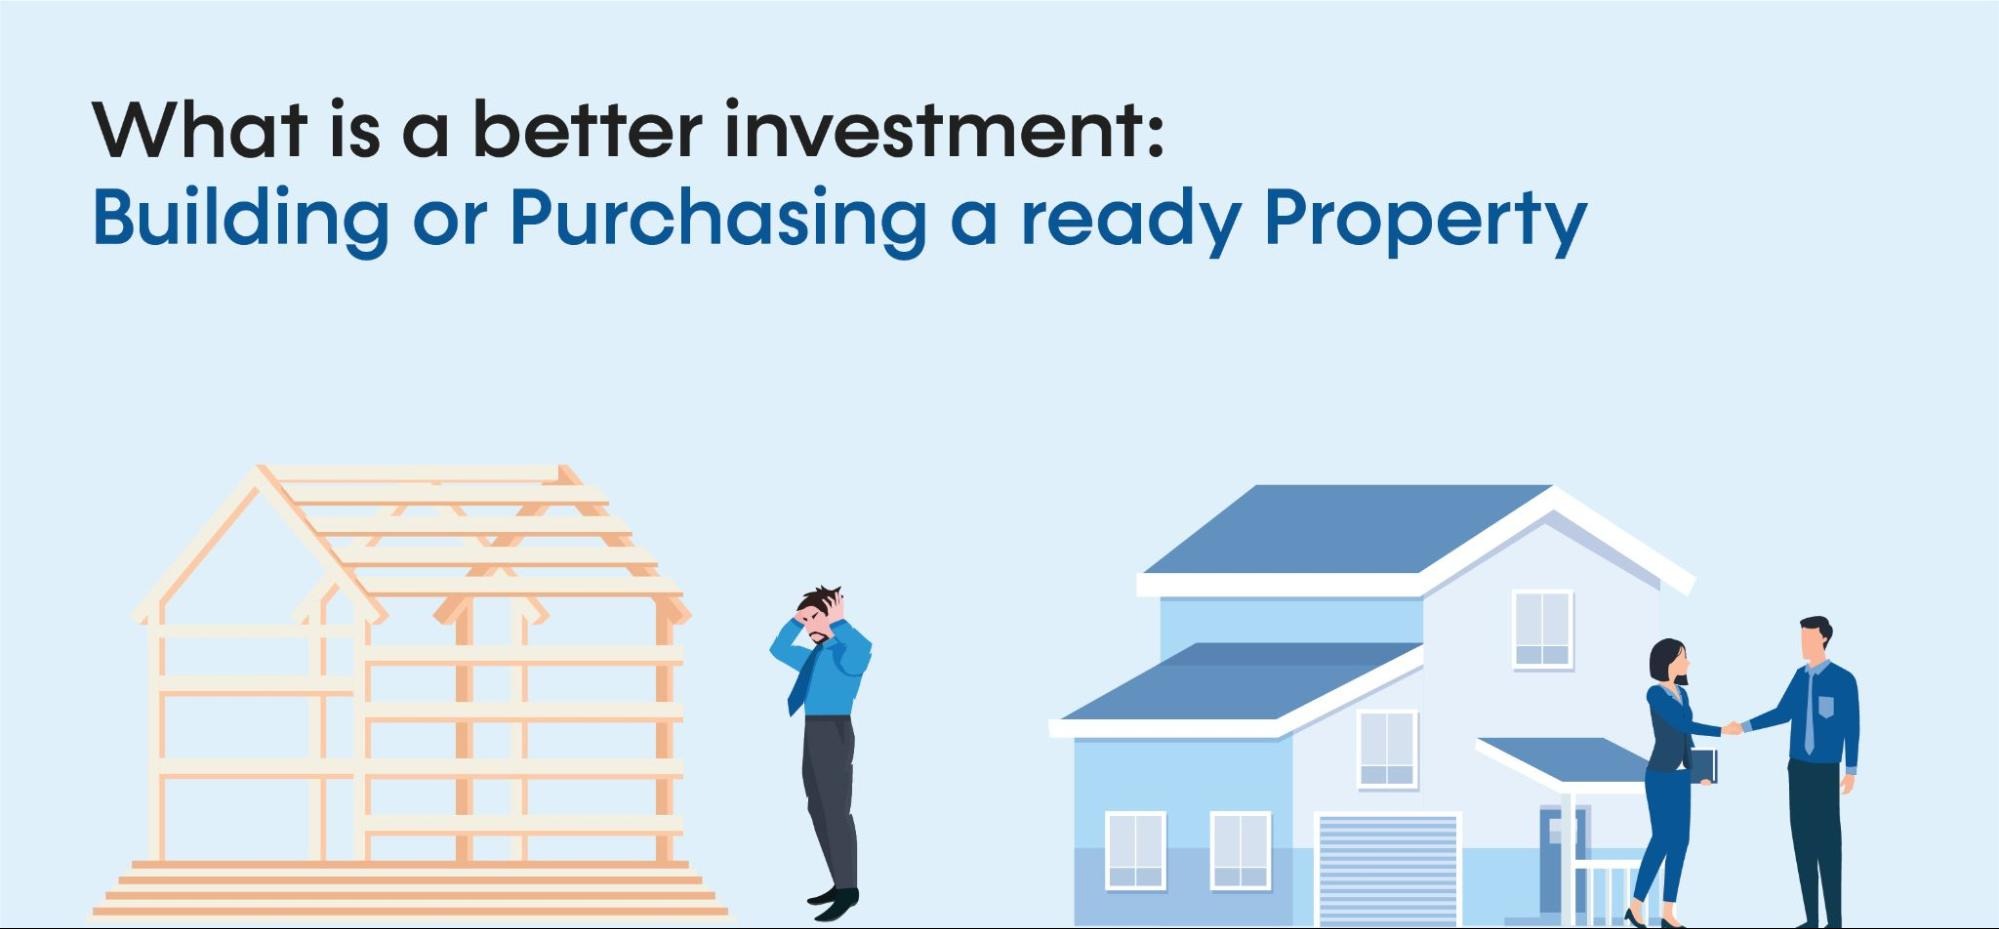 What’s better for investment purpose: Building VS Purchasing Ready Property?